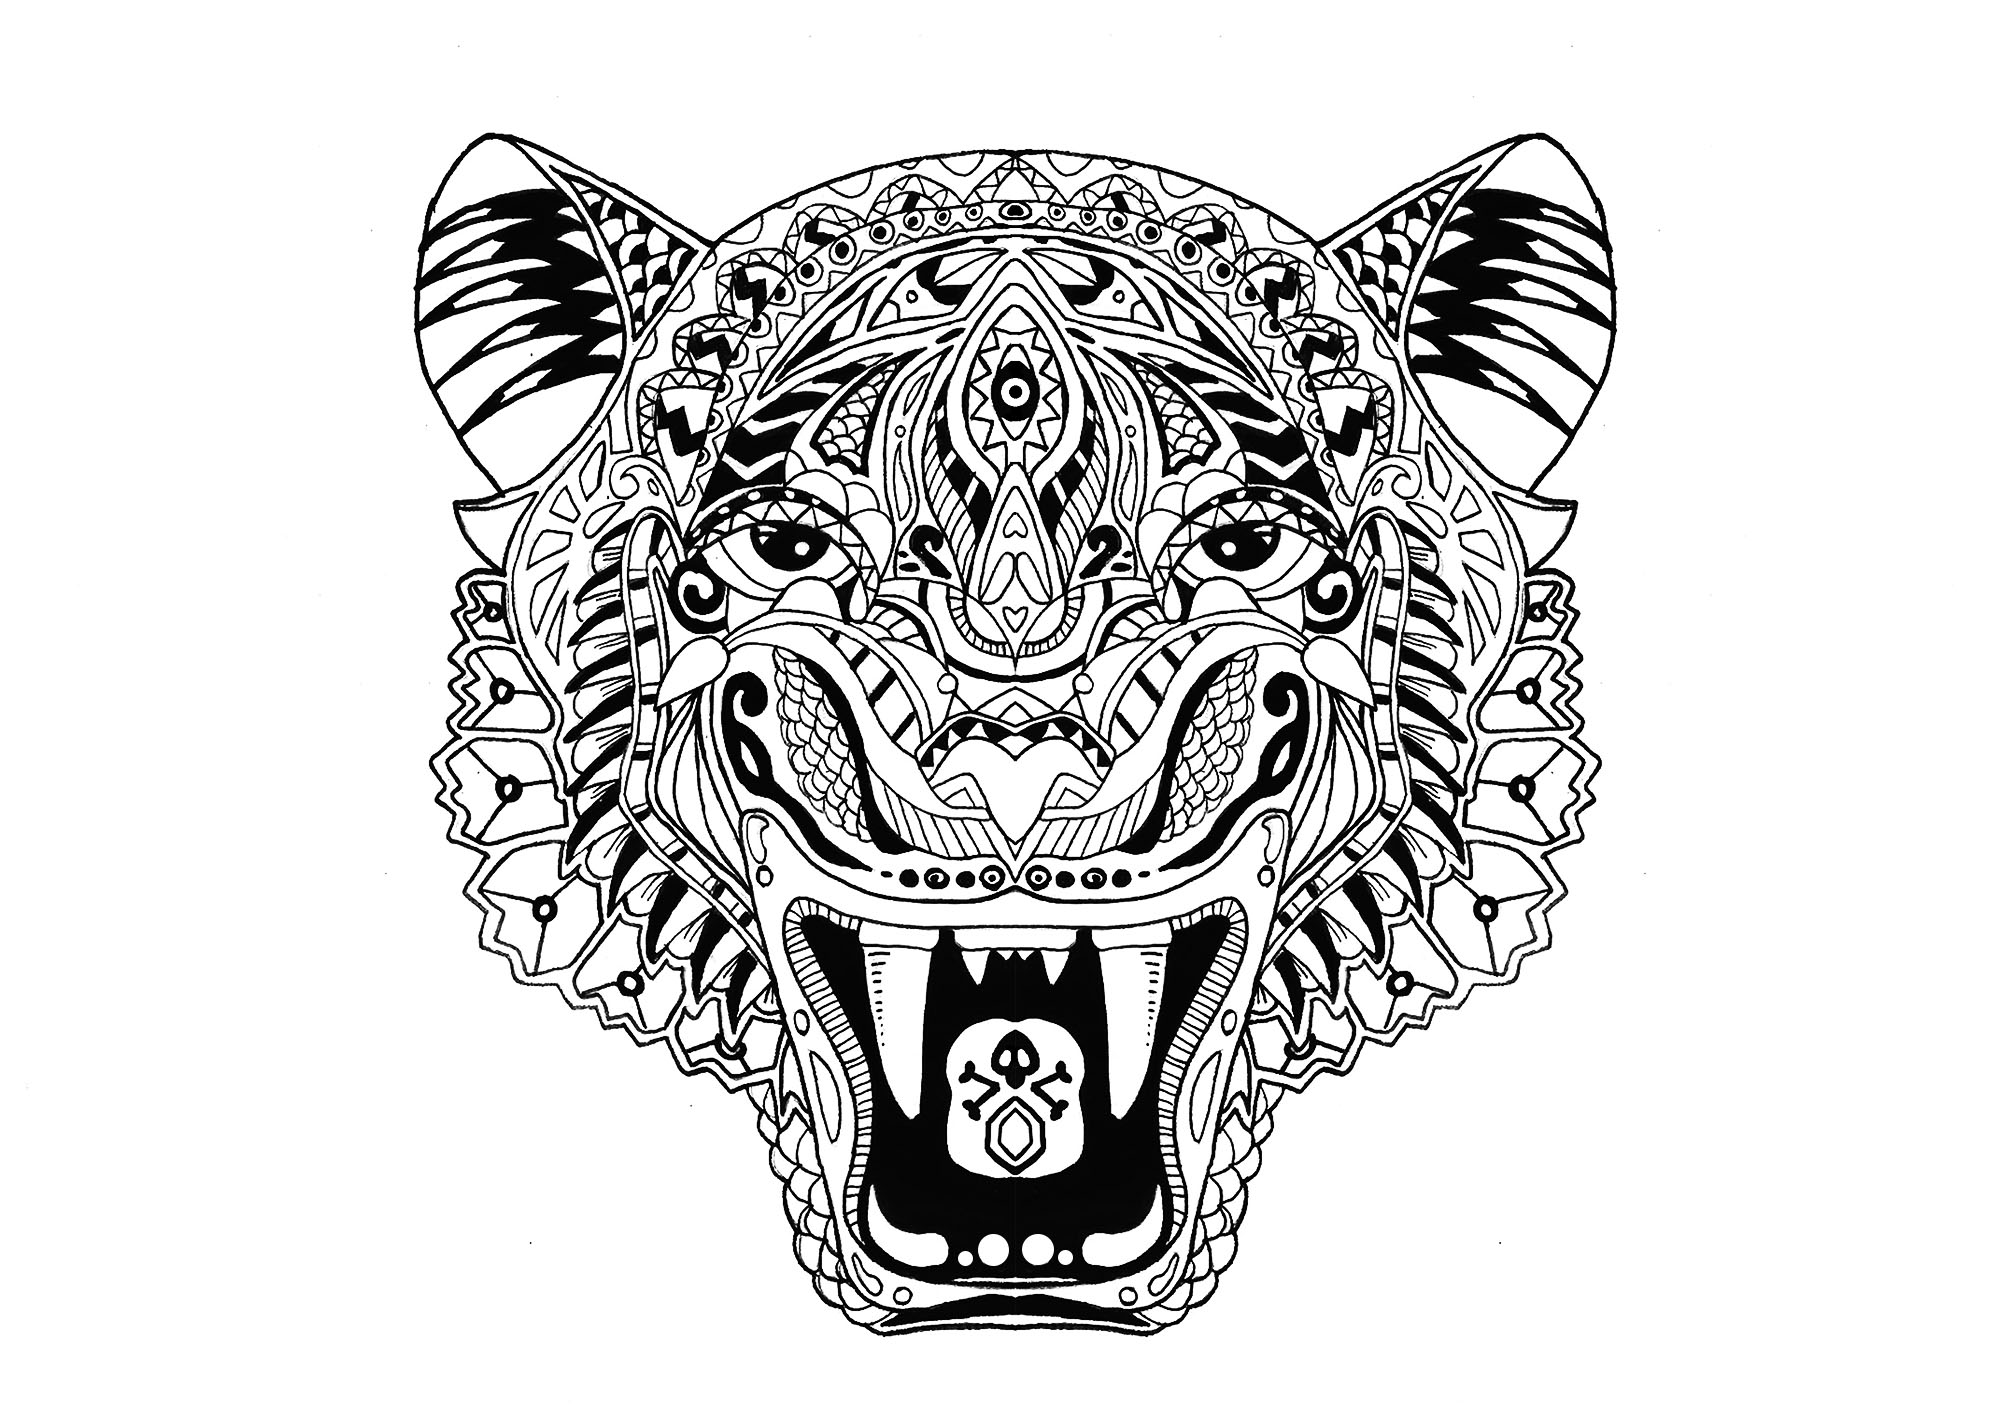 Download Tiger - Tigers Adult Coloring Pages